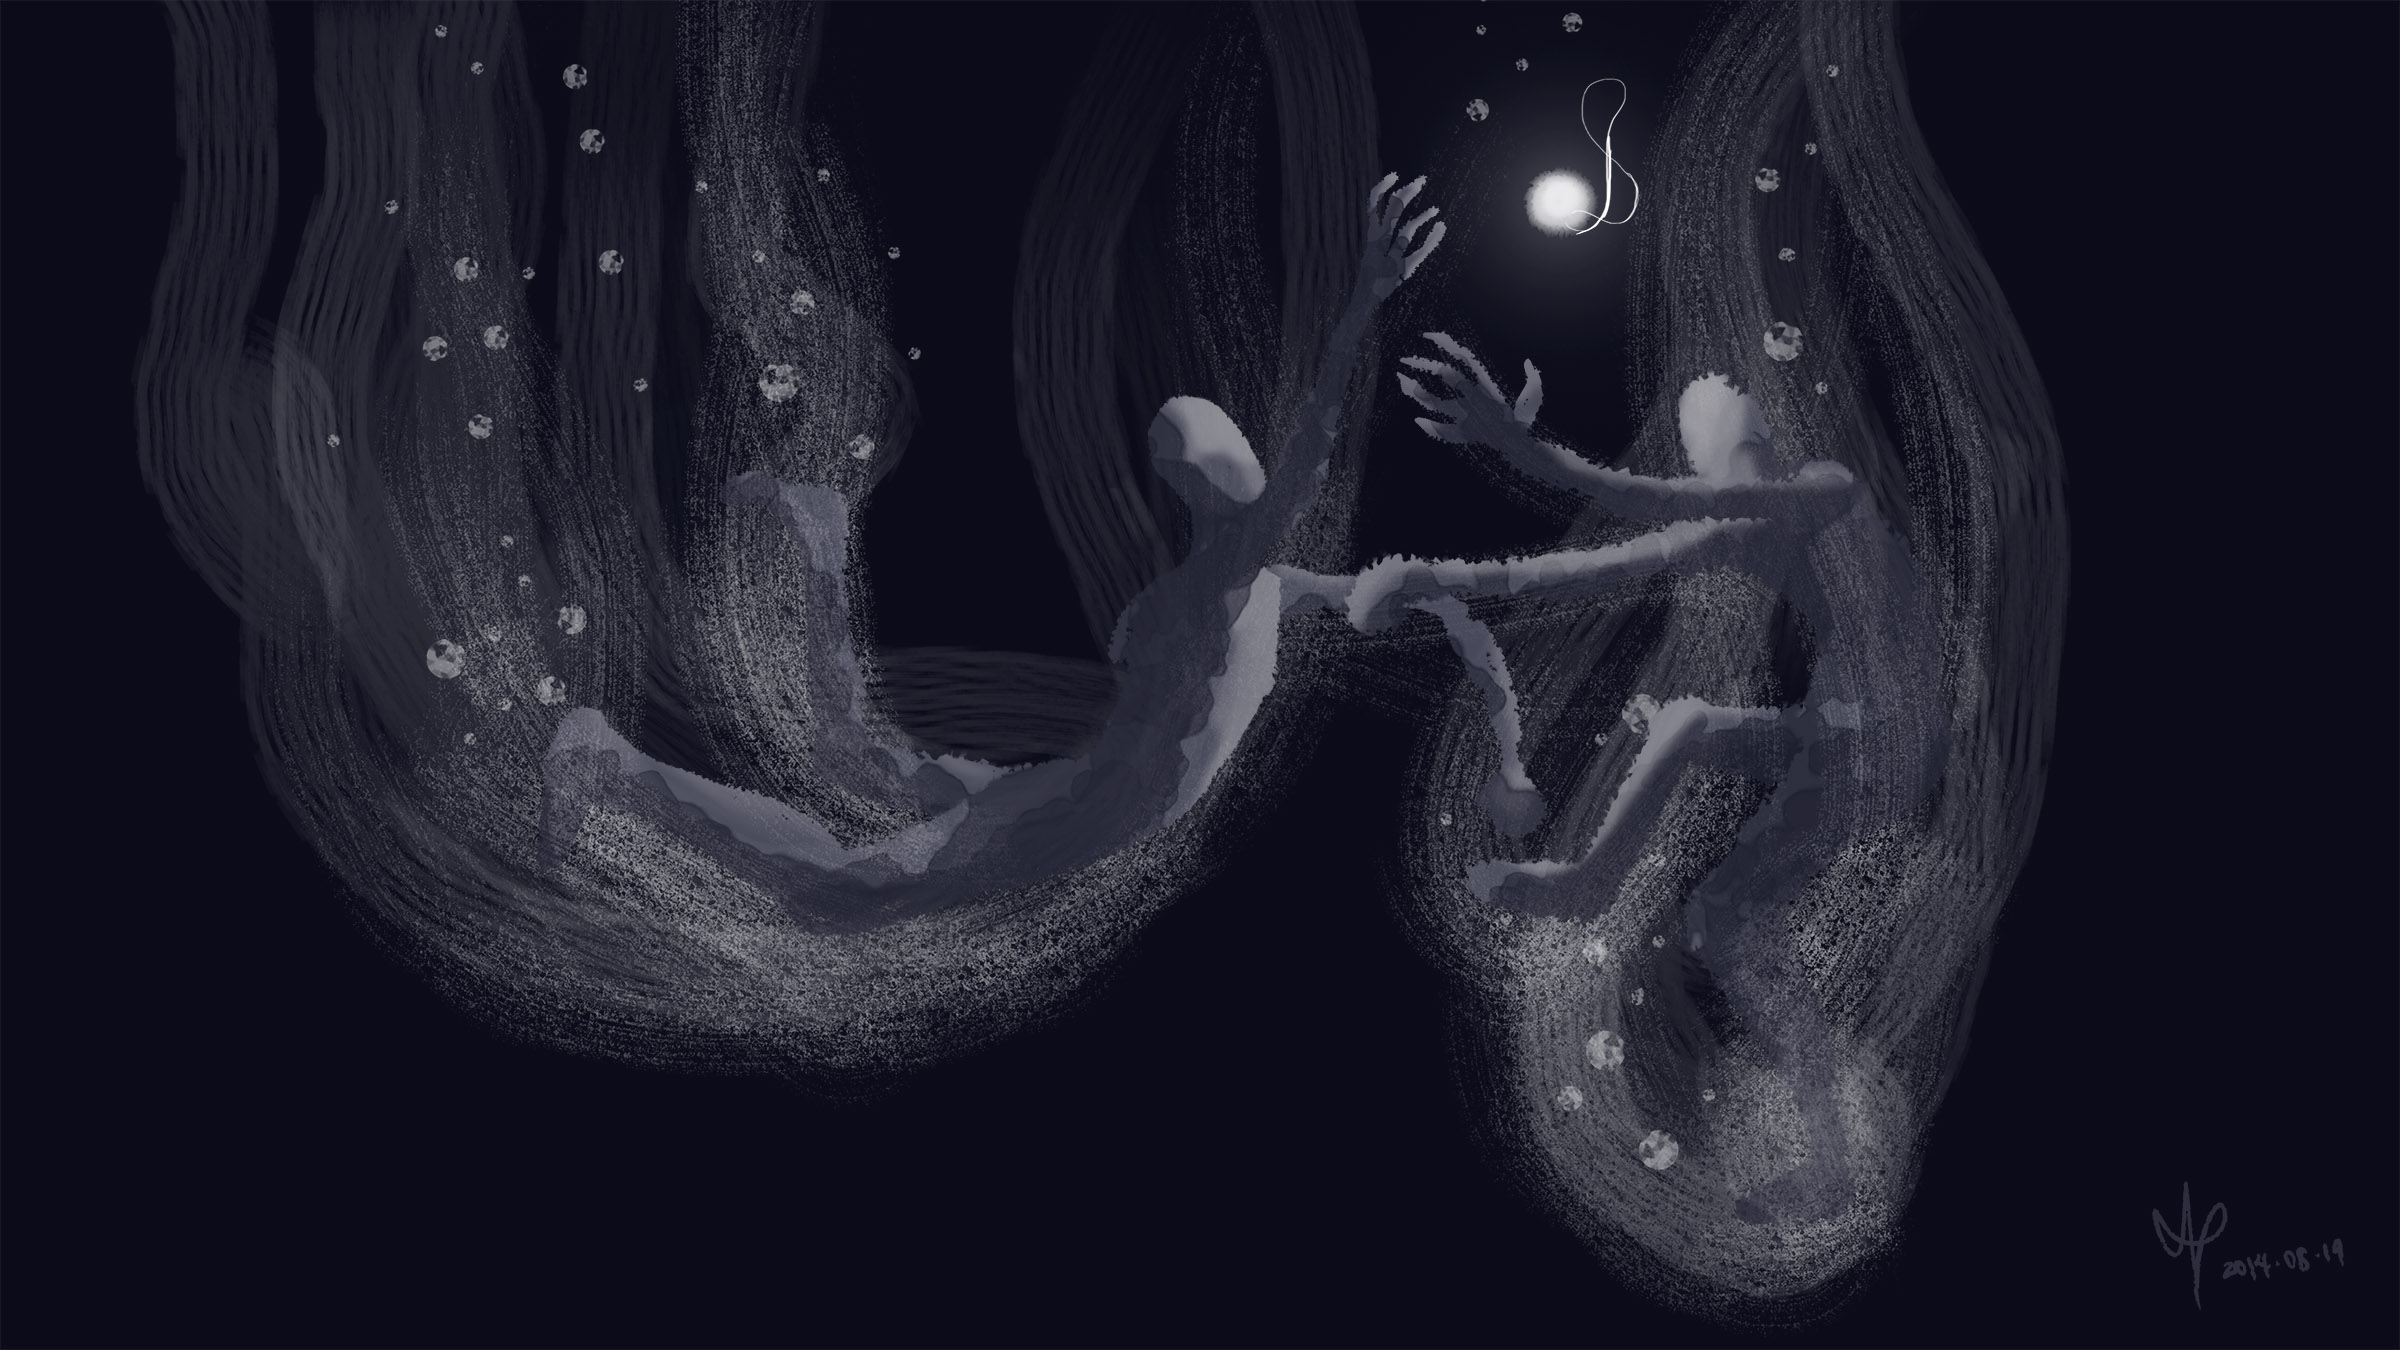 A digital painting of two figures grappling underwater for possession of a glowing necklace.